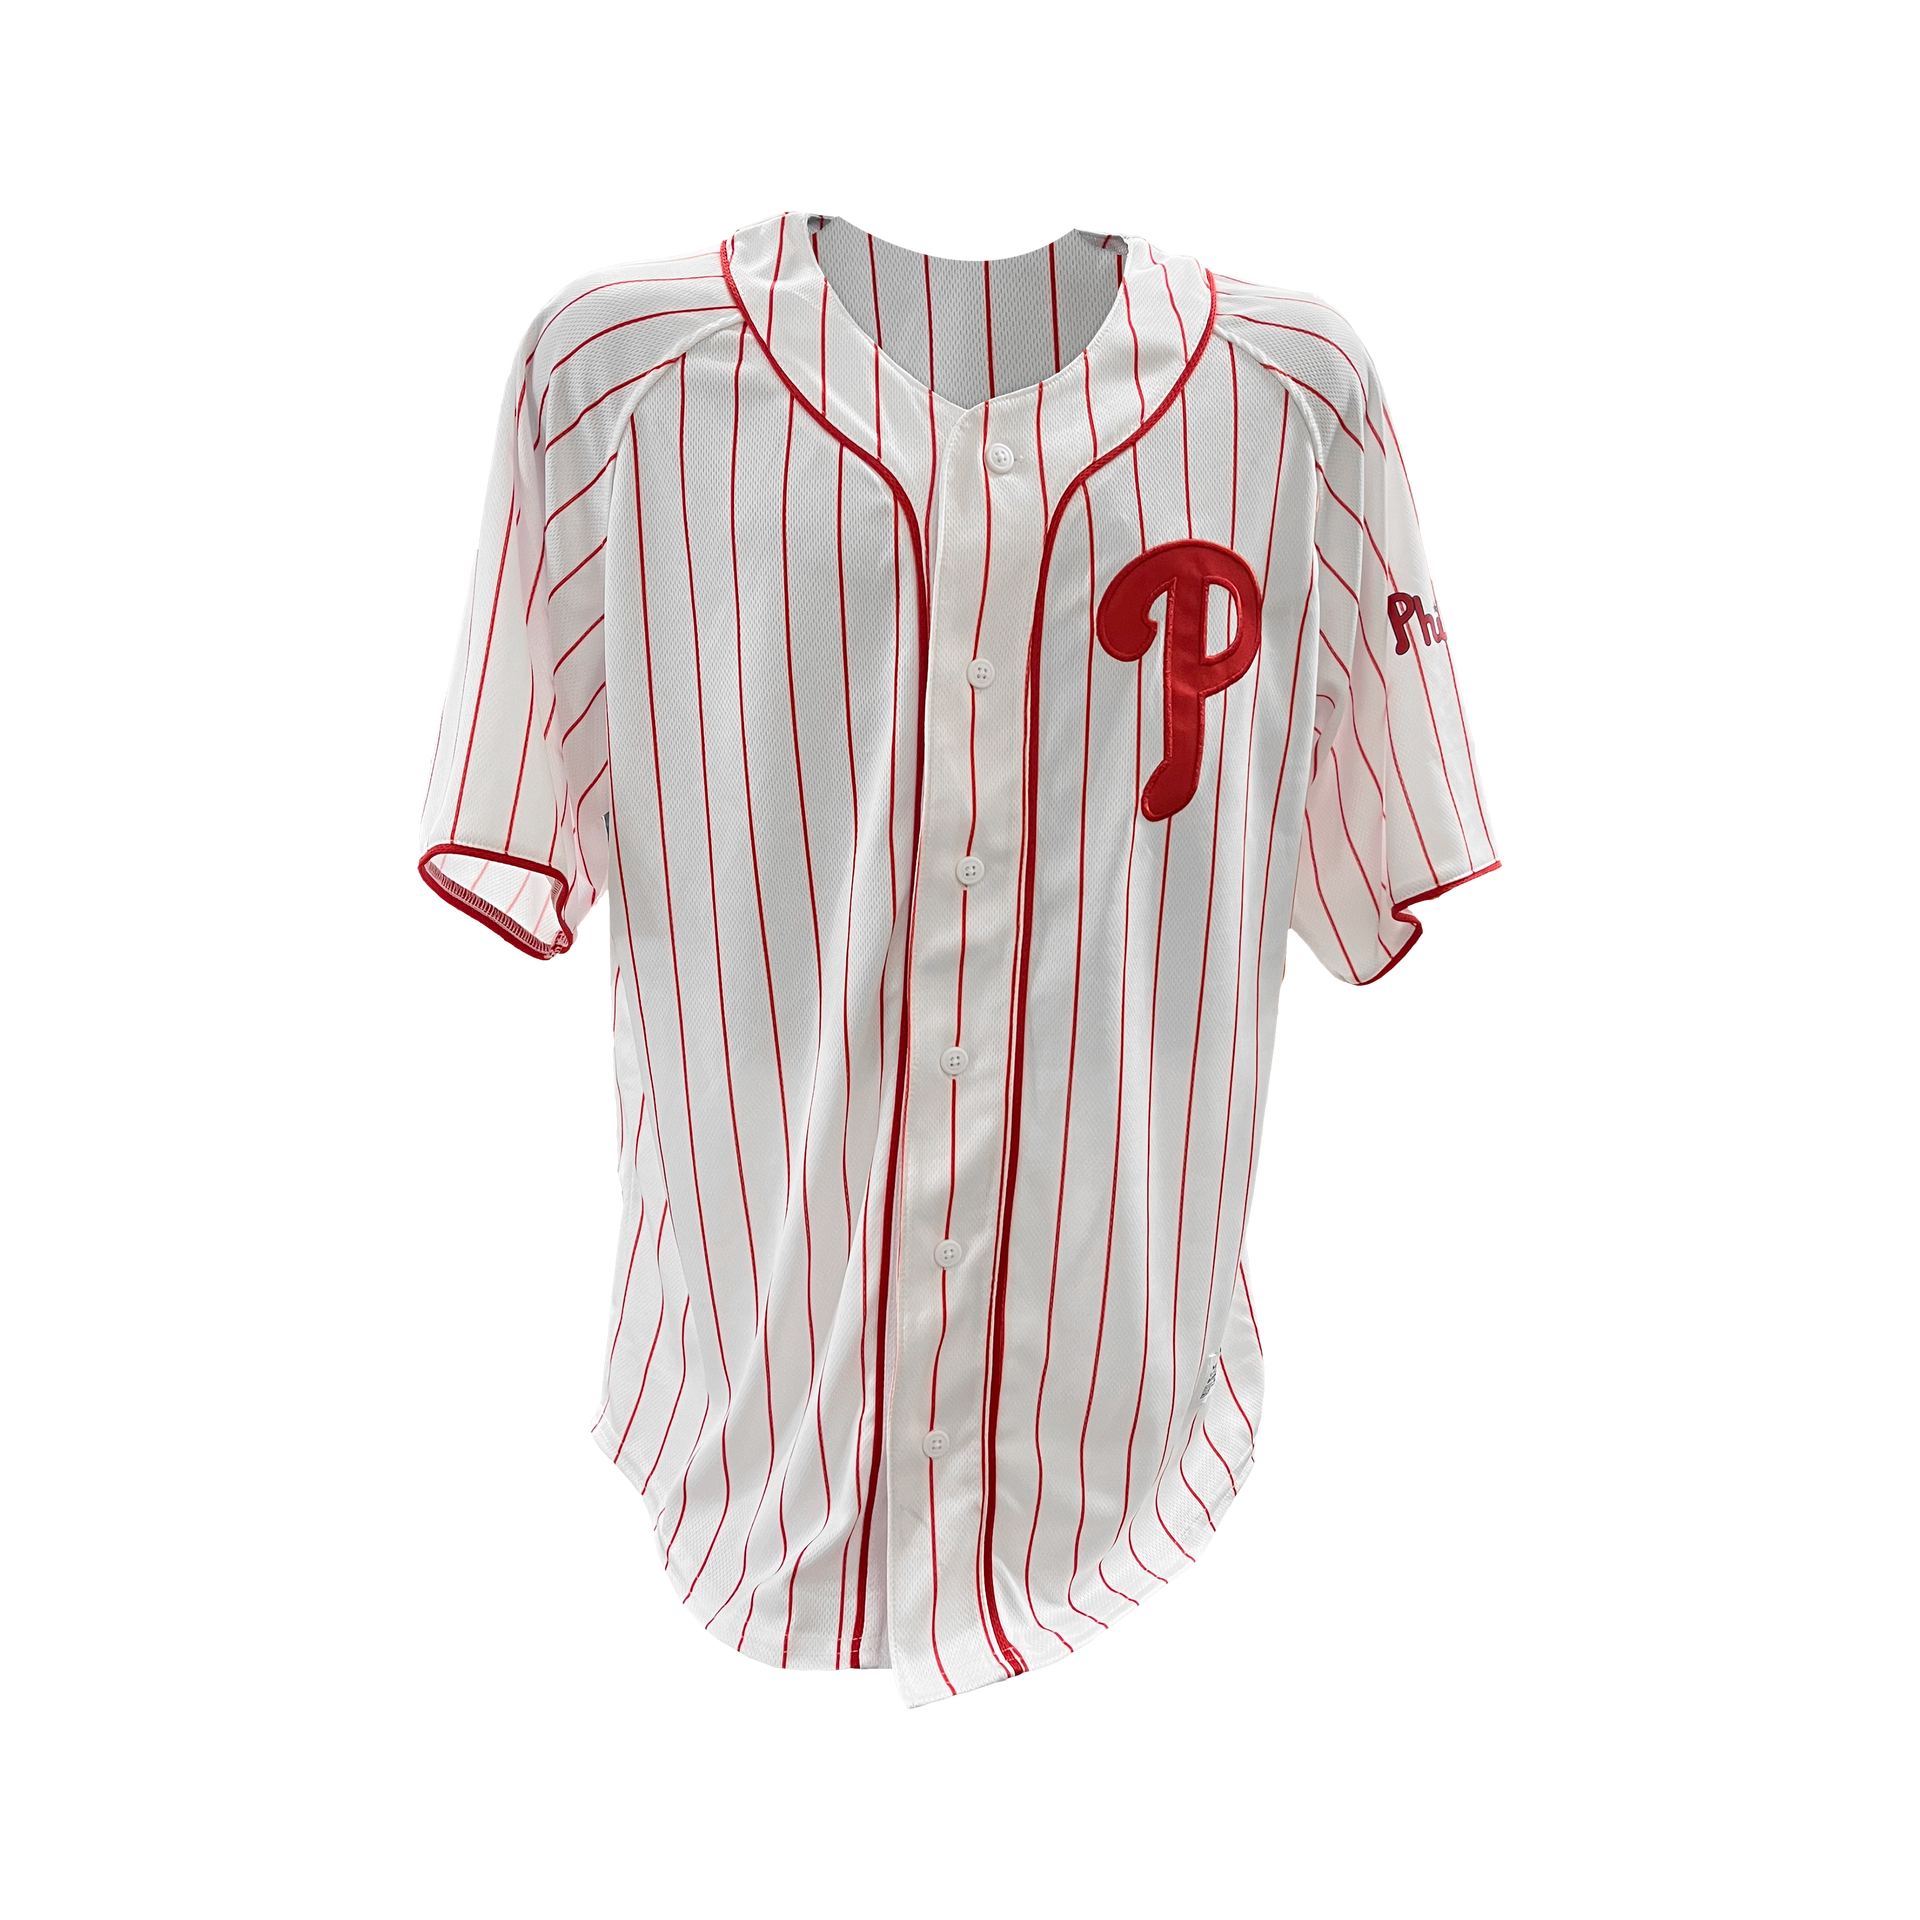 Question about the red Phillies jerseys. Are we going to wear them